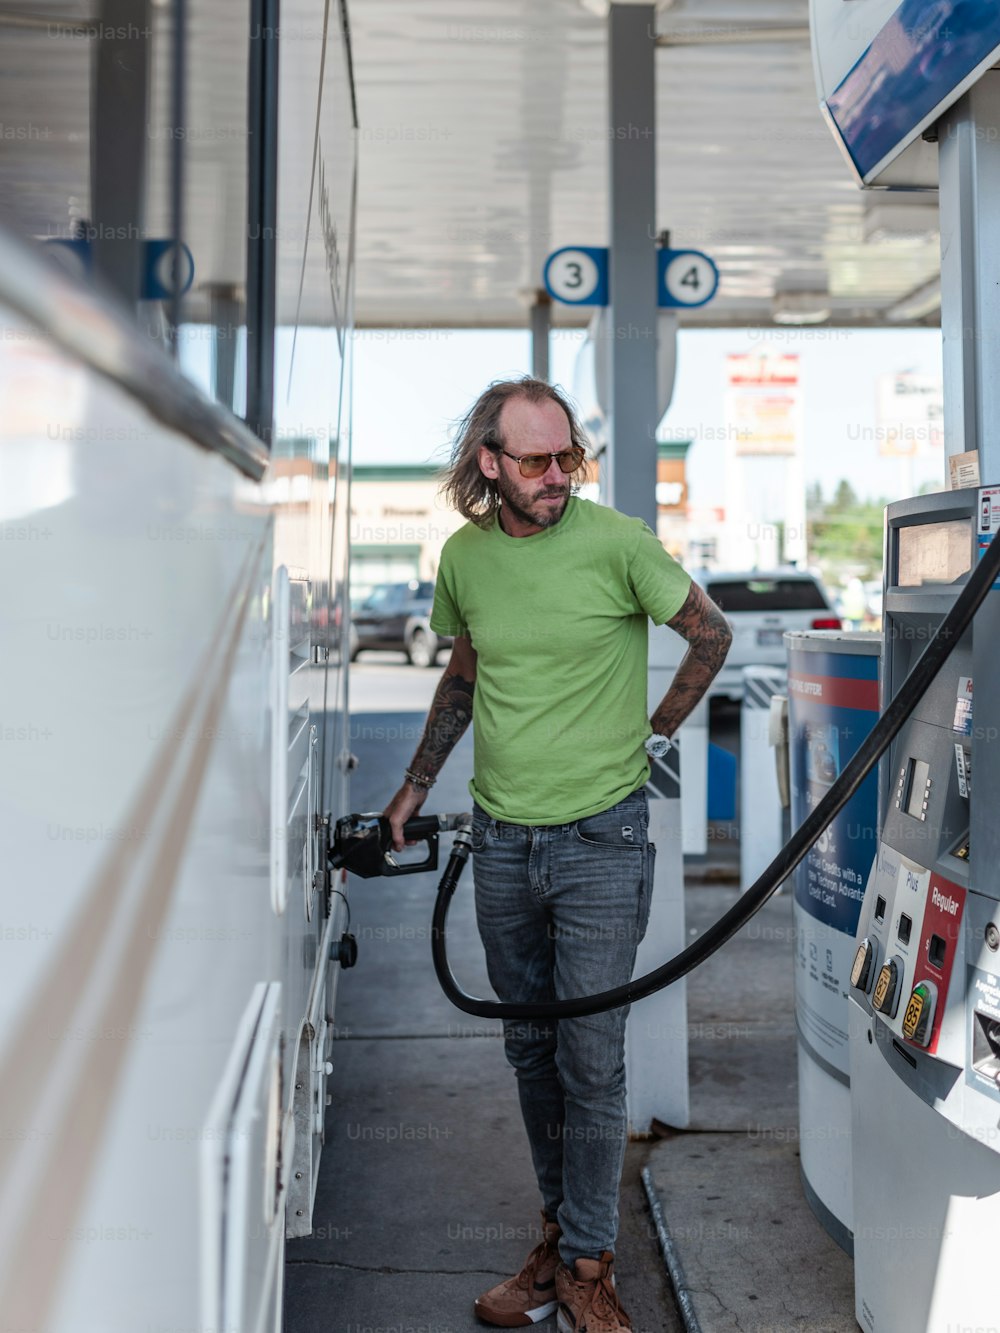 a man in a green shirt is pumping gas into his car